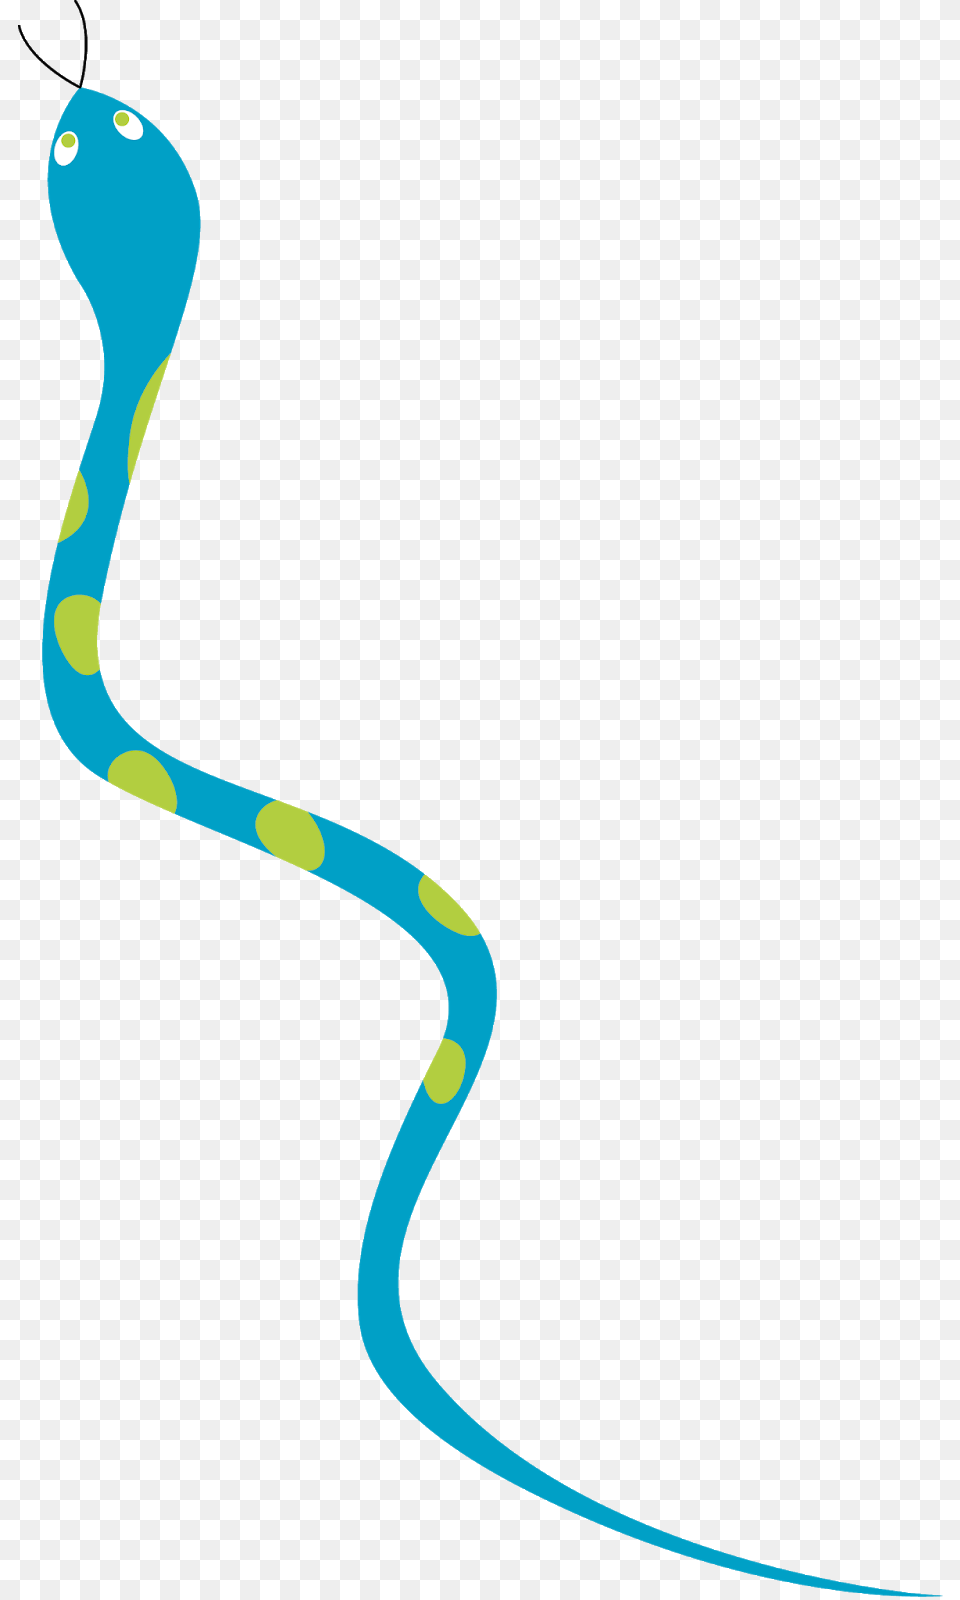 Snake Clip Art For Snake And Ladder, Animal, Reptile Free Png